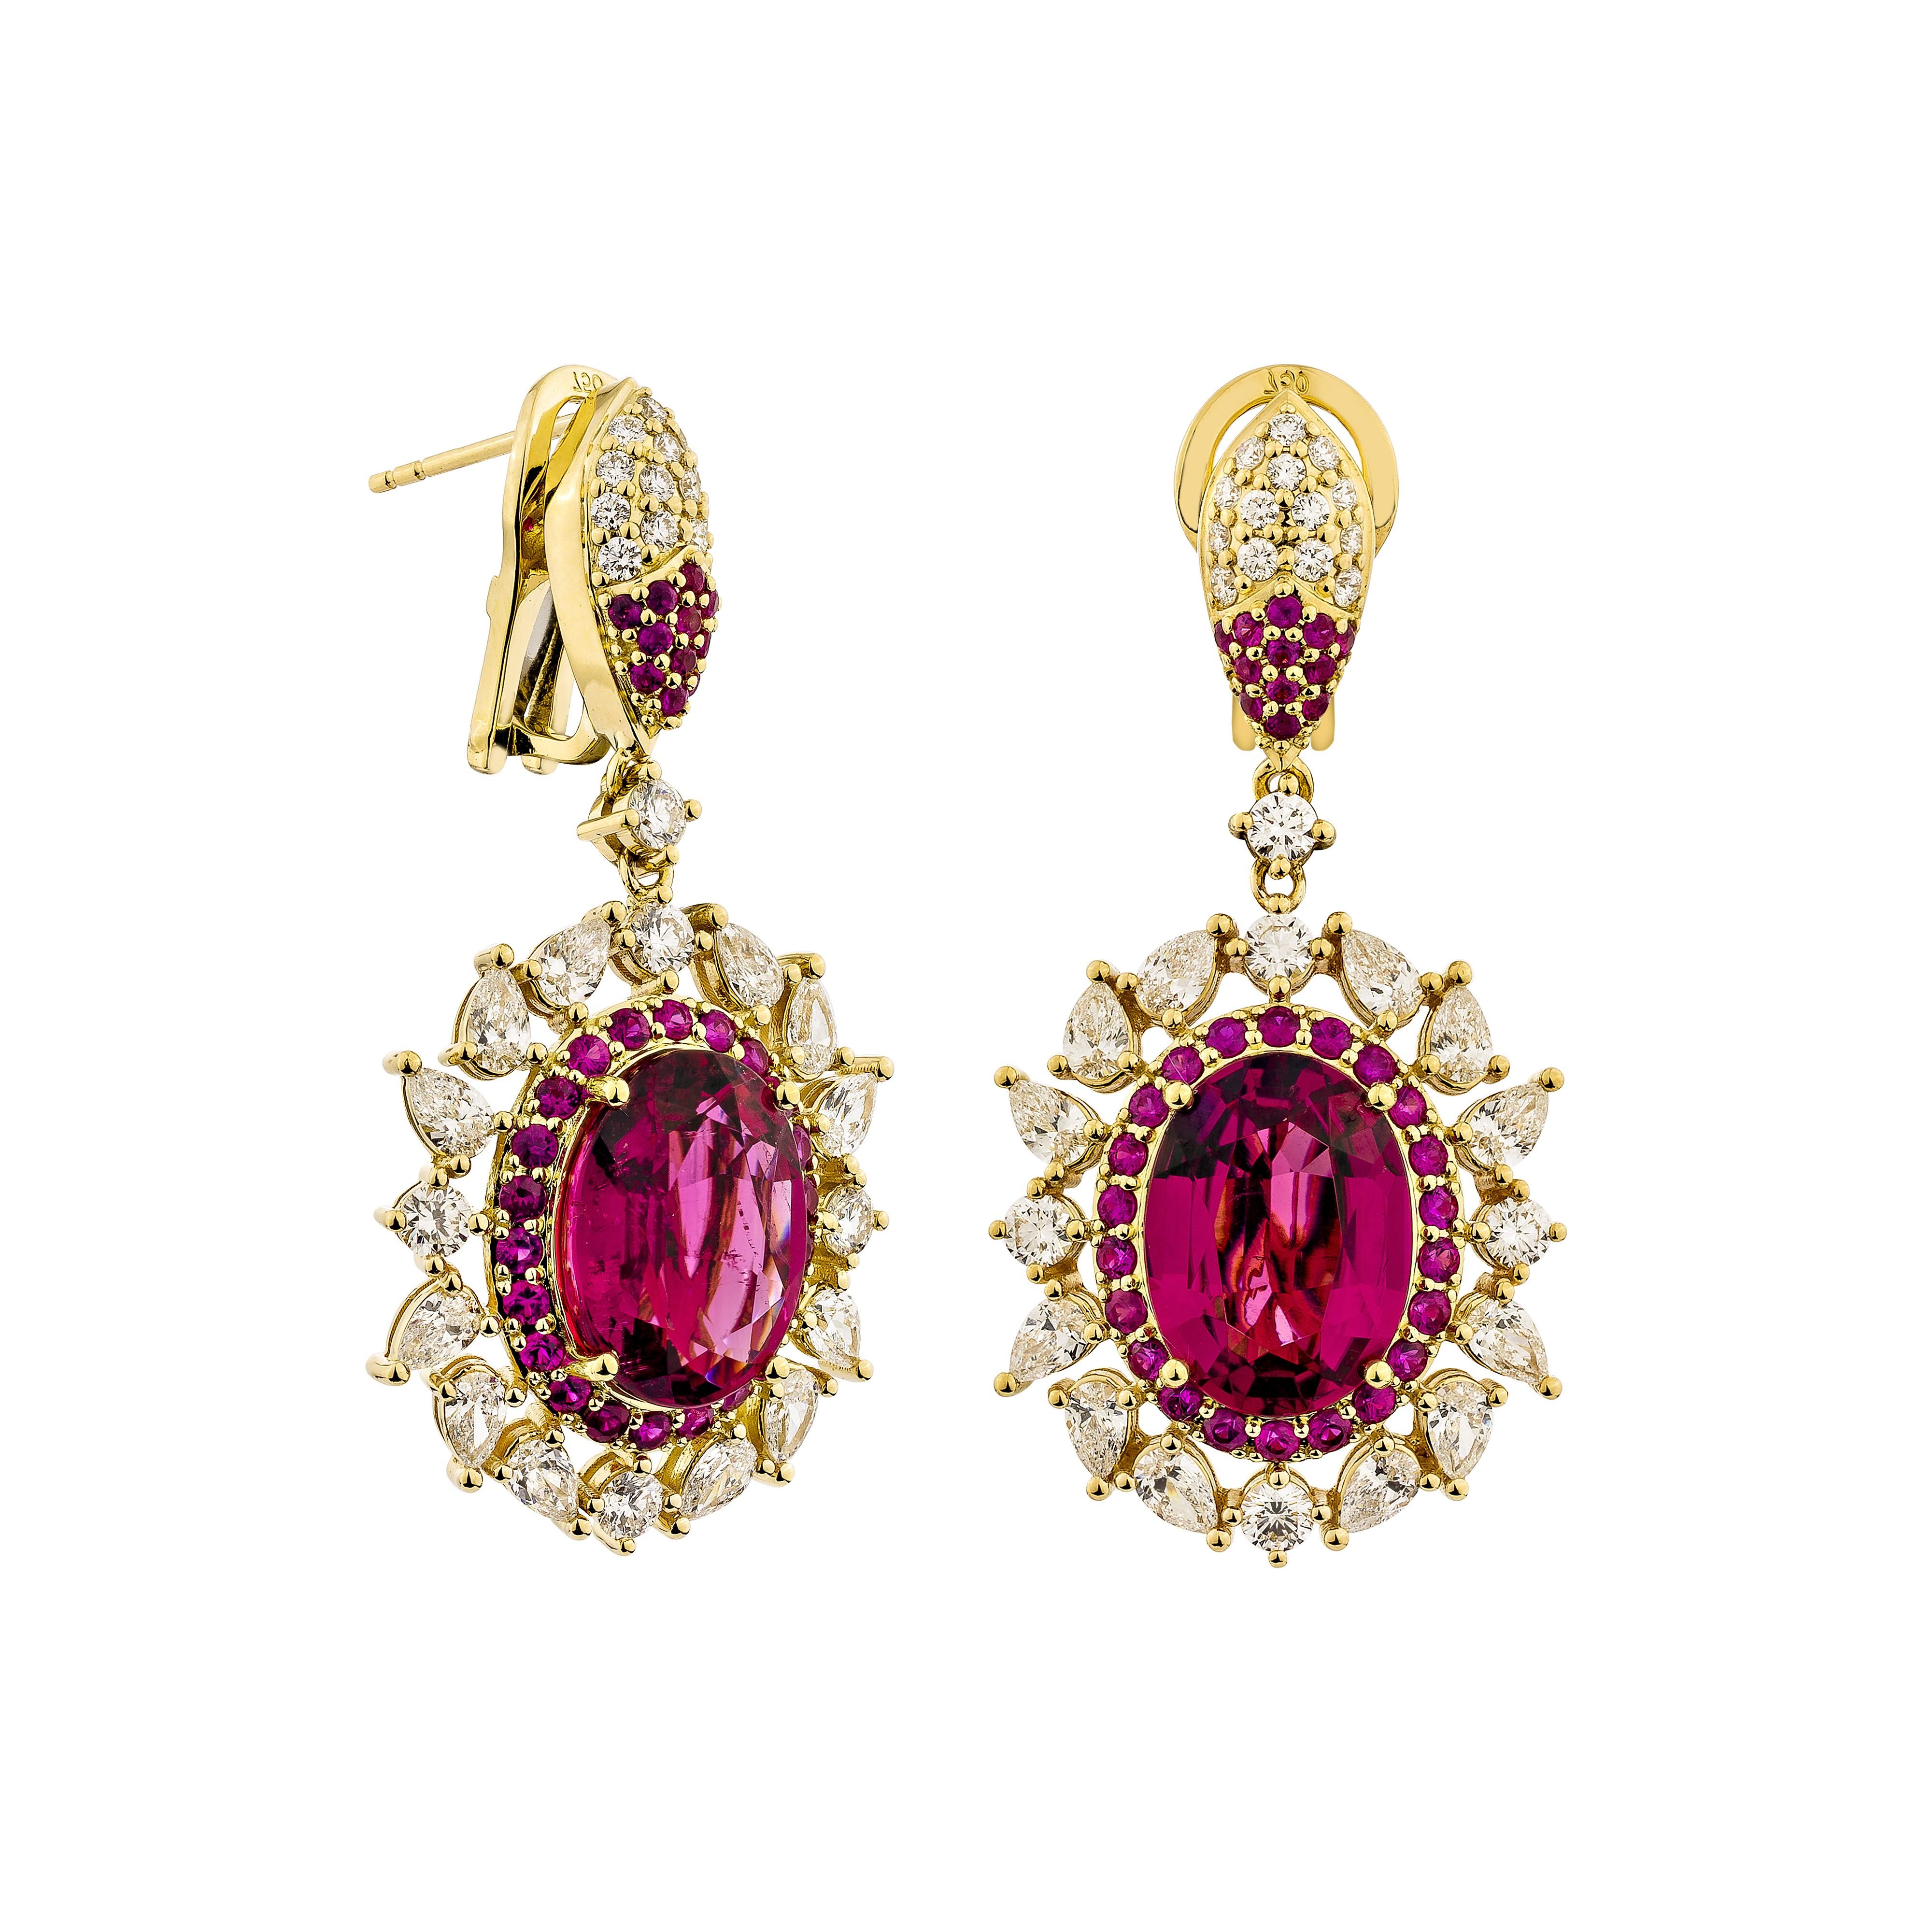 Sunita Nahata showcases an exquisite diamond studded Rubellite jewelry set that exudes grace and elegance. This exquisite 18Karat yellow gold set is ideal for any special occasion because it combines traditional elegance with modern